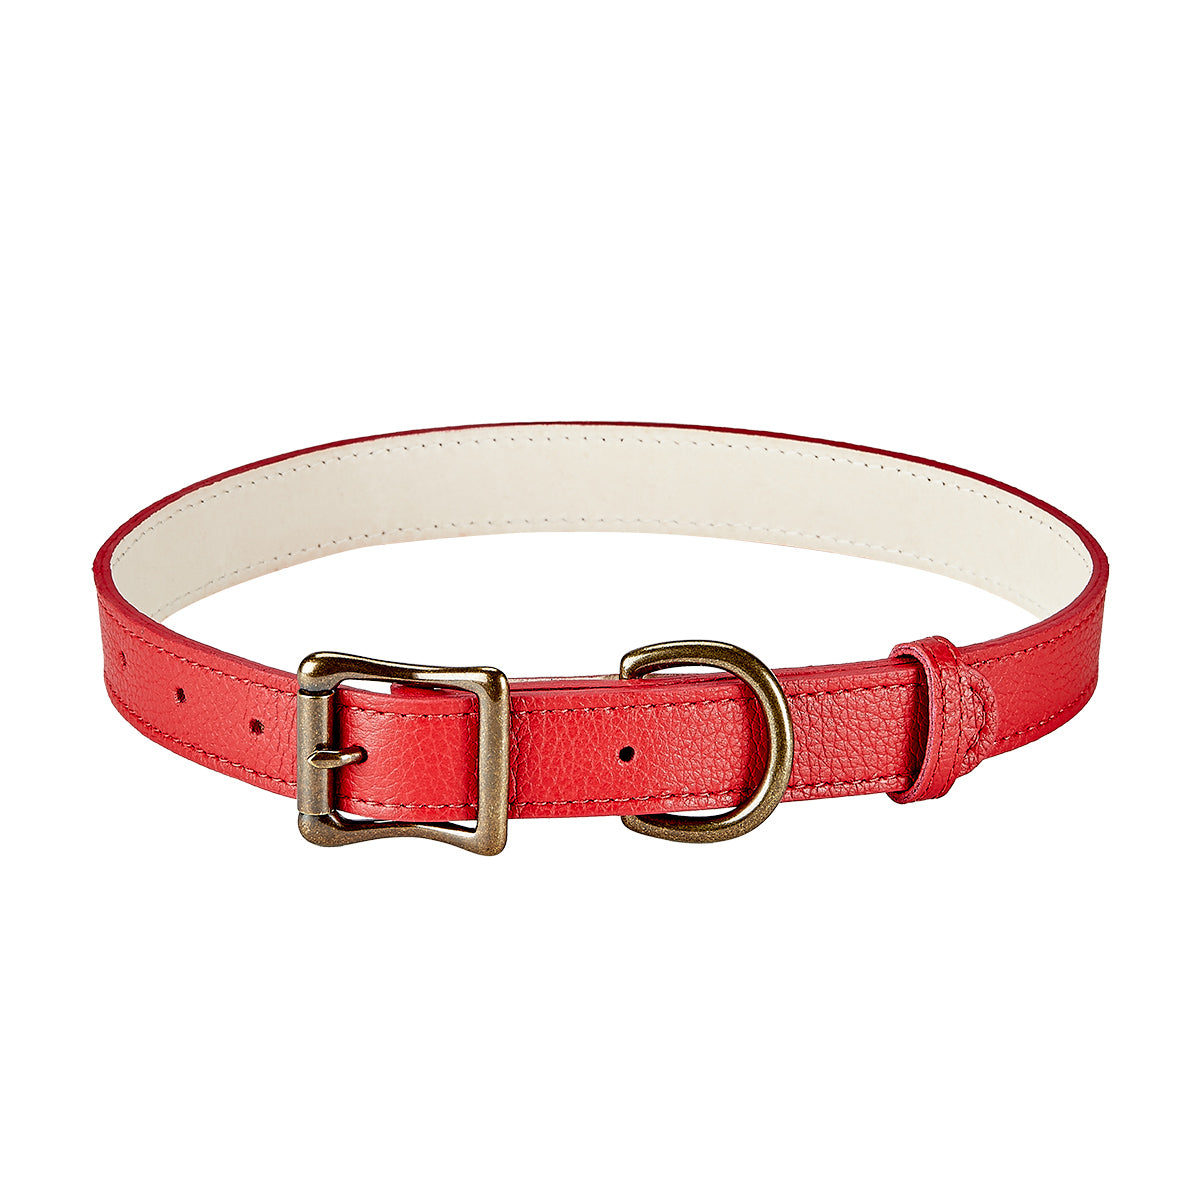 Graphic Image Large Dog Collar Red Pebble Grain Leather